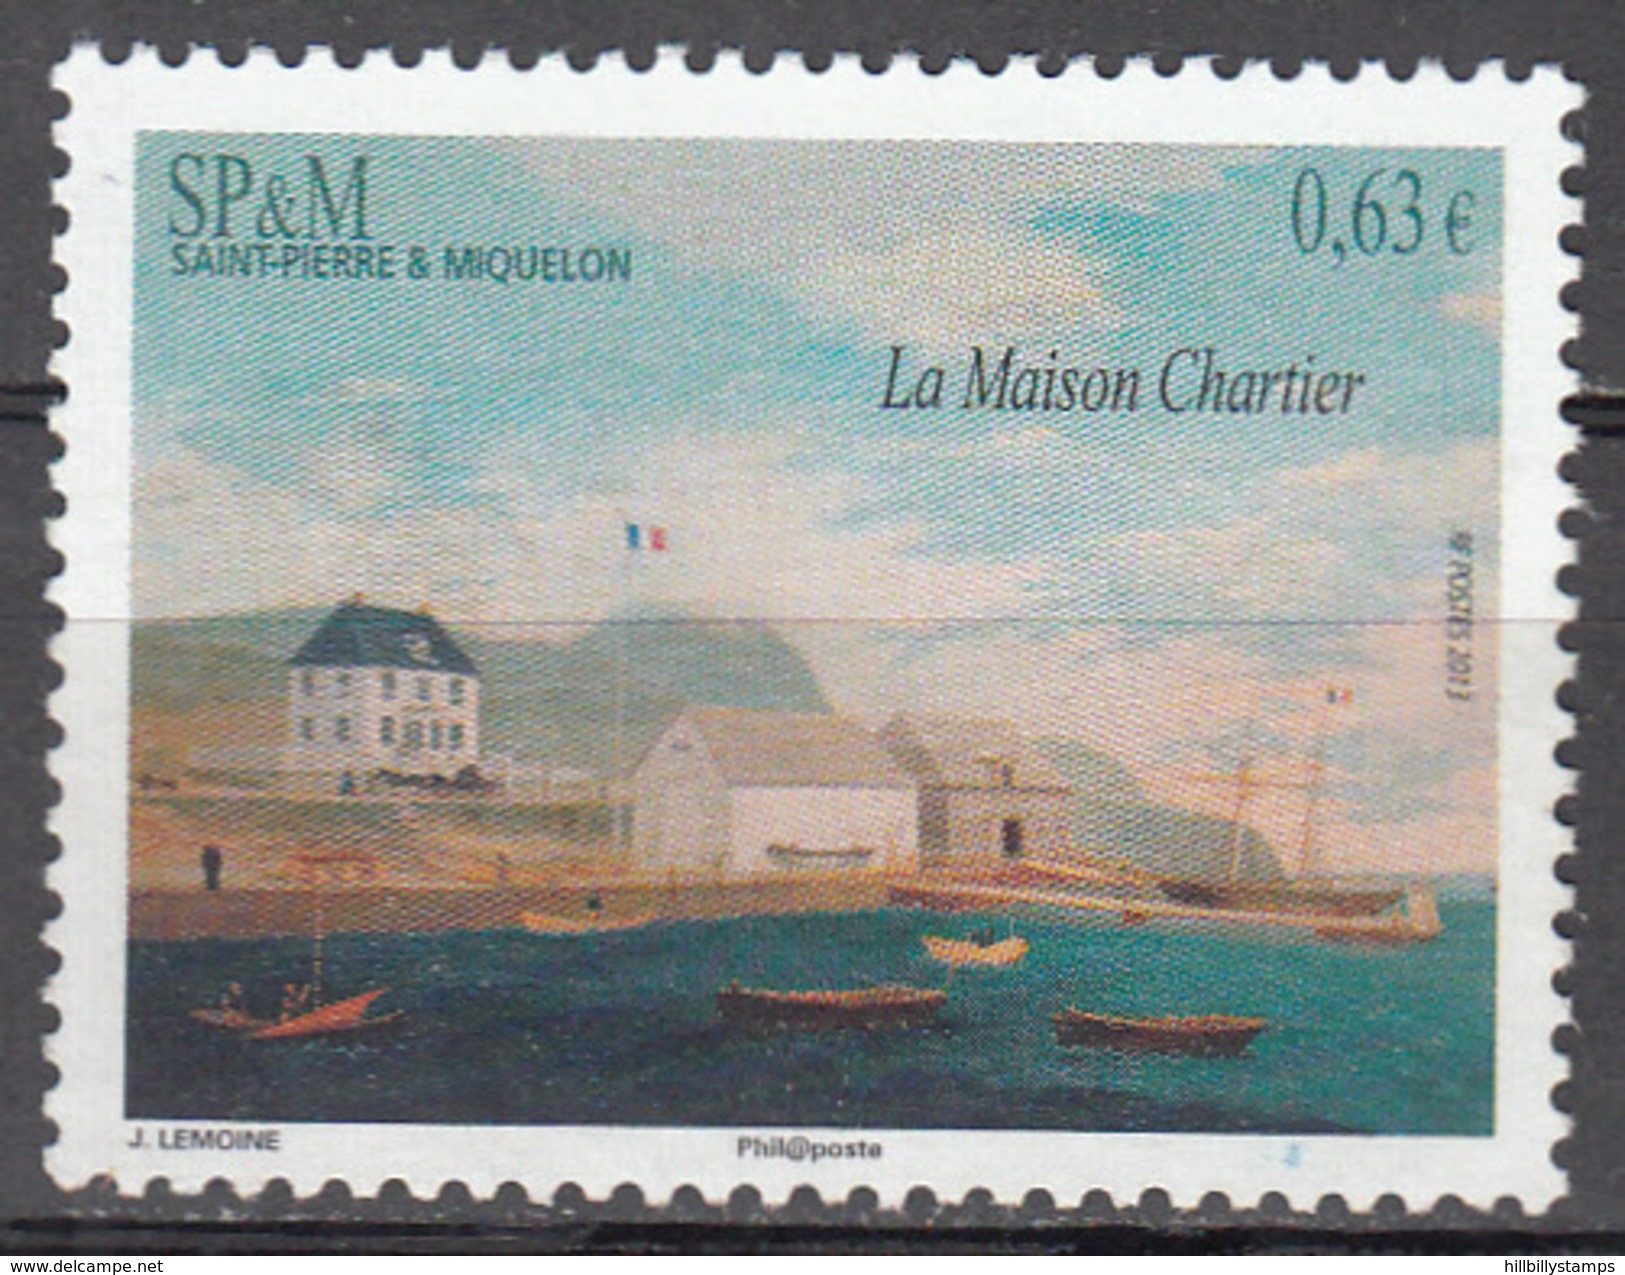 ST. PIERRE AND MIQUELON       SCOTT NO.  967     USED       YEAR  2013 - Usados